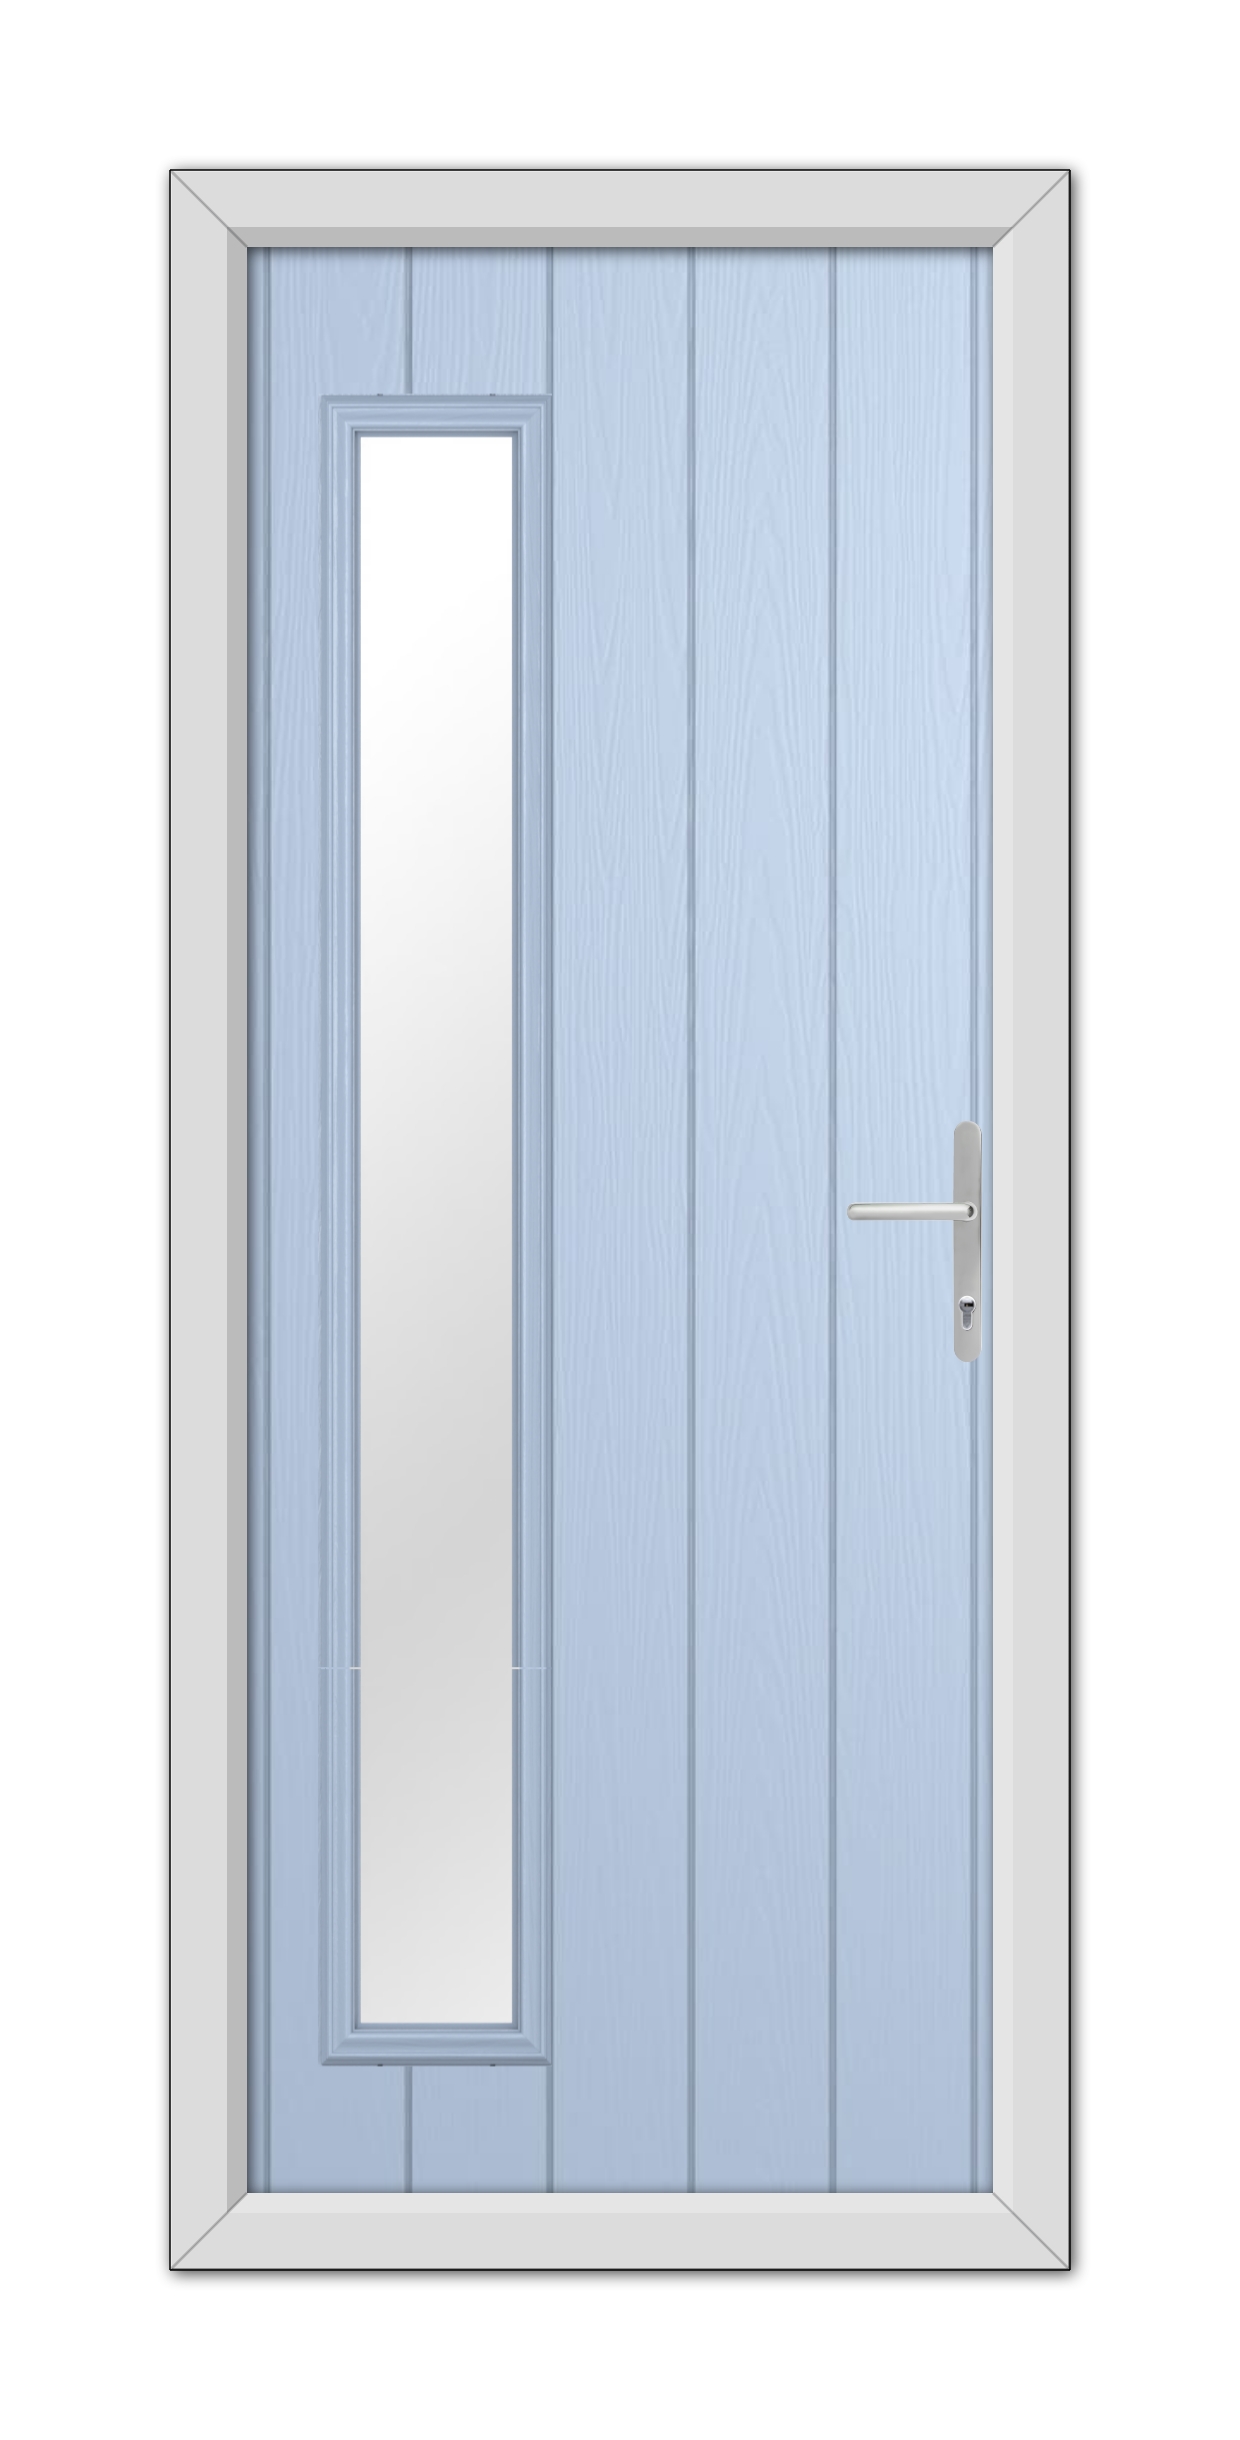 A Duck Egg Blue Sutherland Composite Door 48mm Timber Core with a vertical rectangular window and a silver handle, set within a white frame.